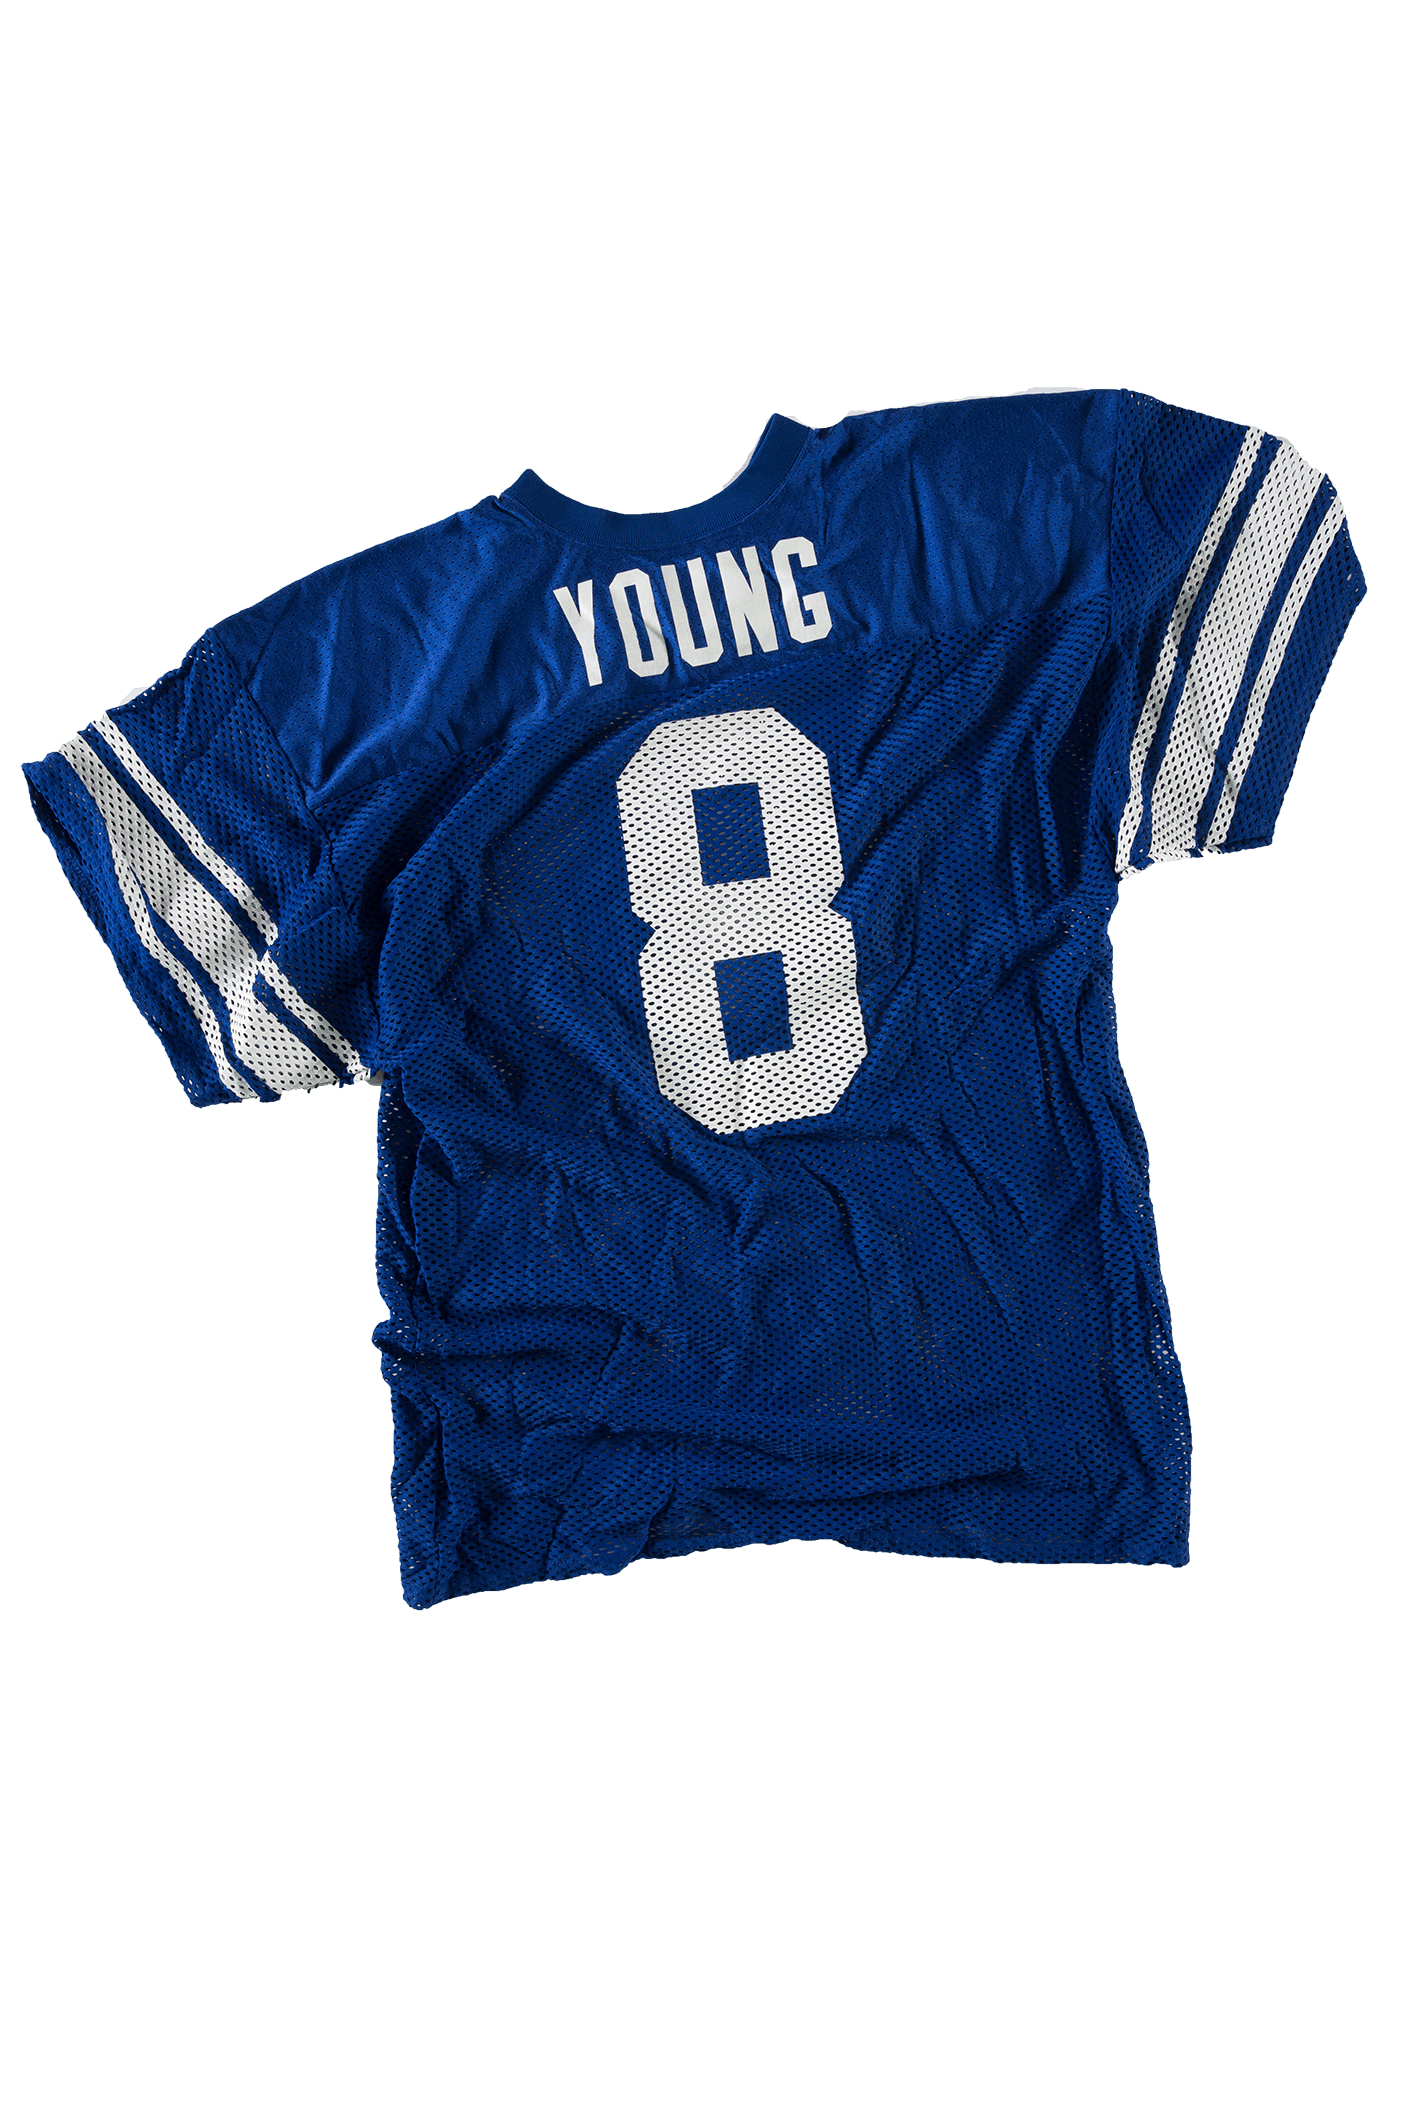 Steve Young's BYU jersey